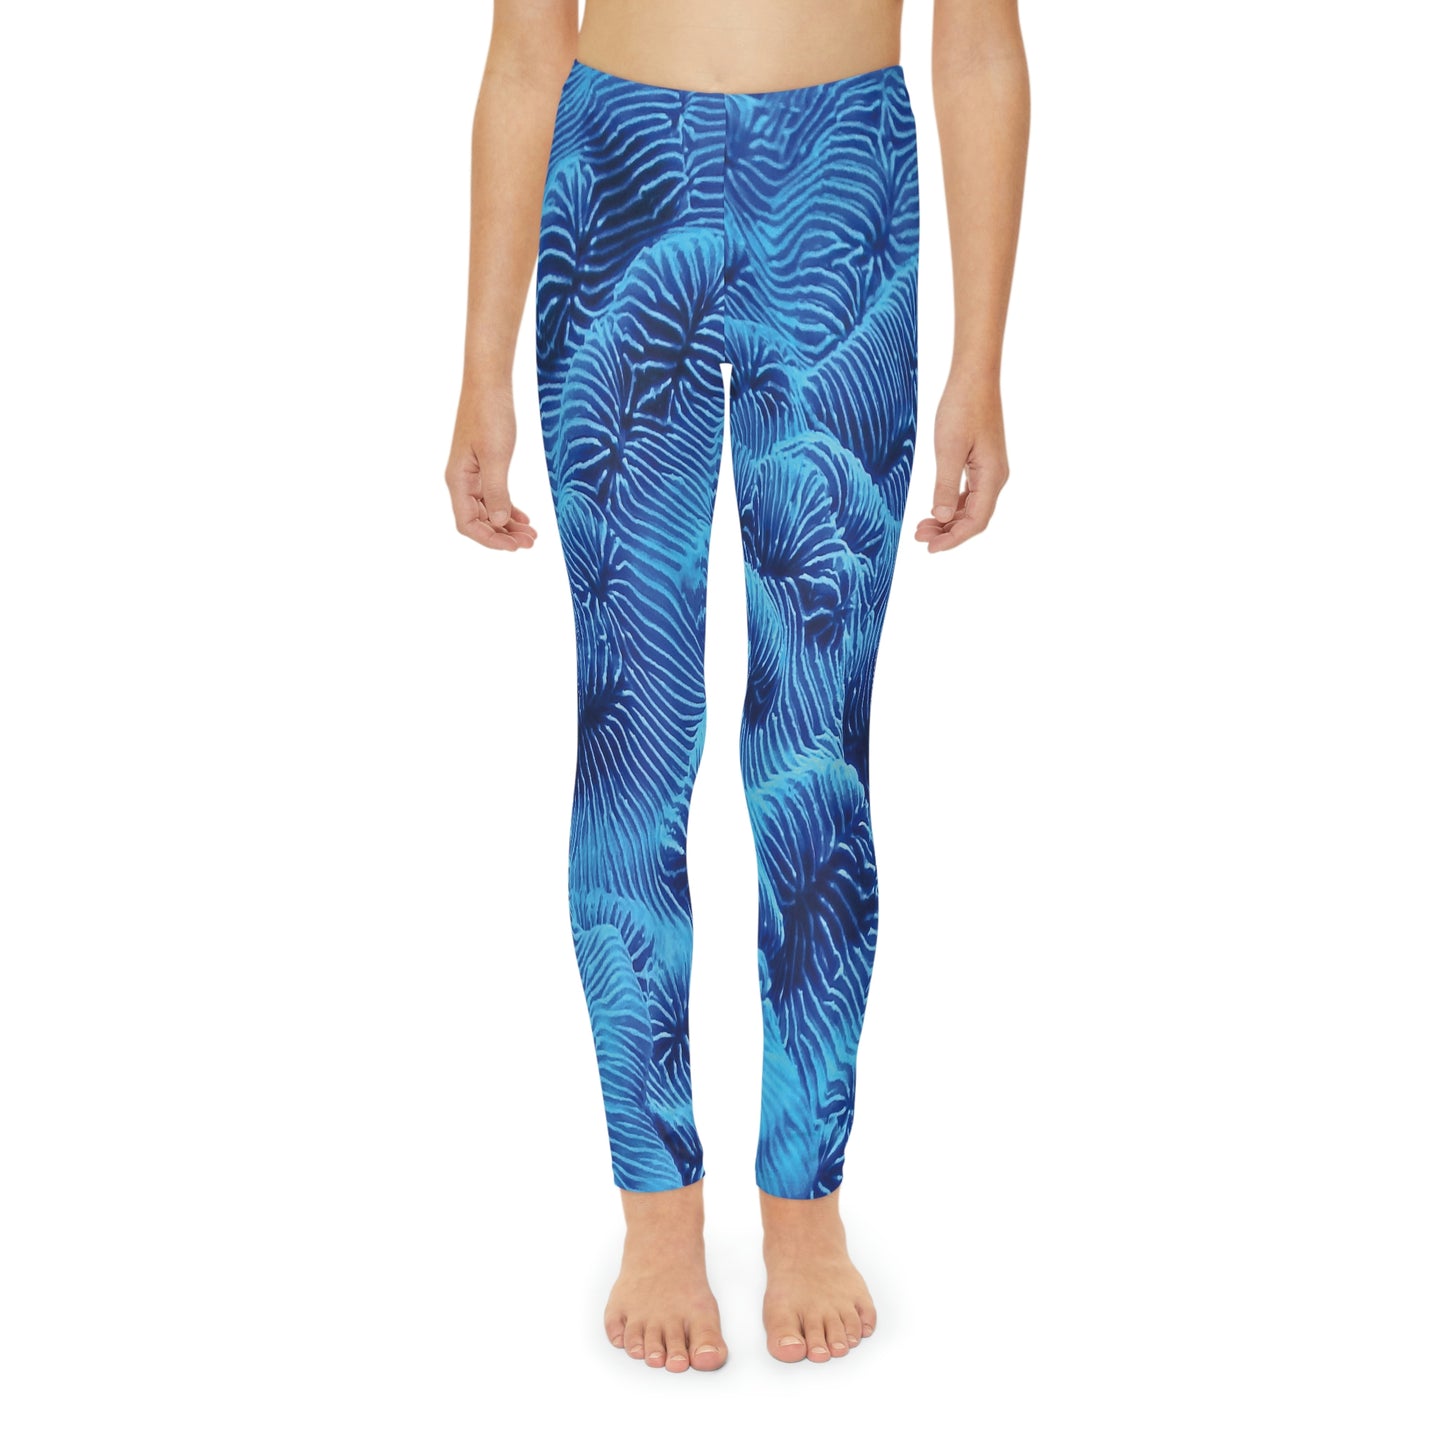 Ocean, Beach Coastal Youth Leggings, One of a Kind Gift - Workout Activewear tights for kids, Granddaughter, Niece Christmas Gift